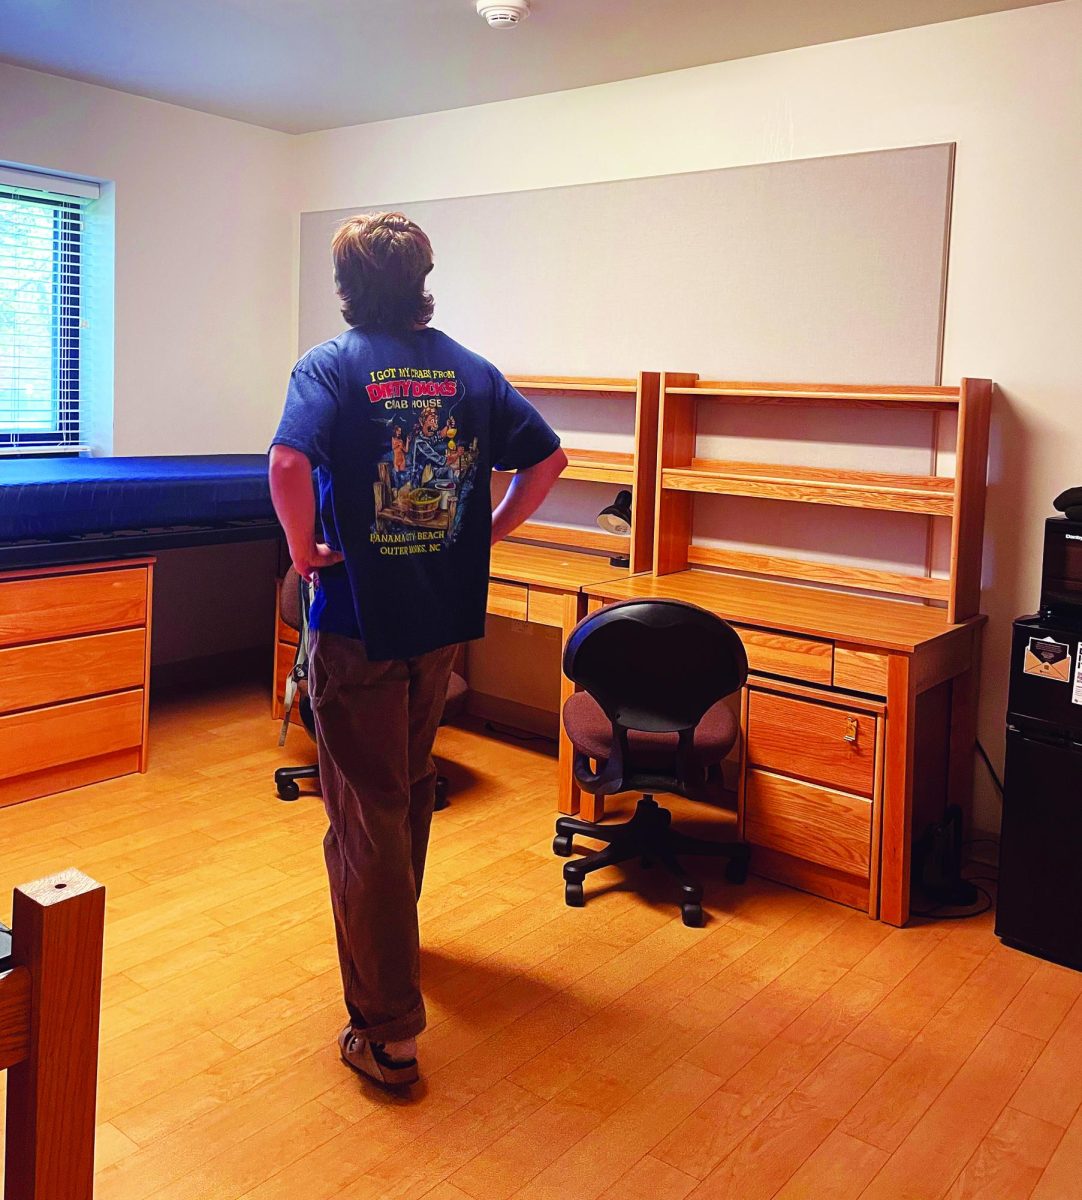 Taking+it+in...Surveying+his+dorm+room+before+heading+home+for+the+summer%2C+University+of+Colorado+Boulder+freshman+Patrick+Rother+reminisces+about+his+first+year+in+college.